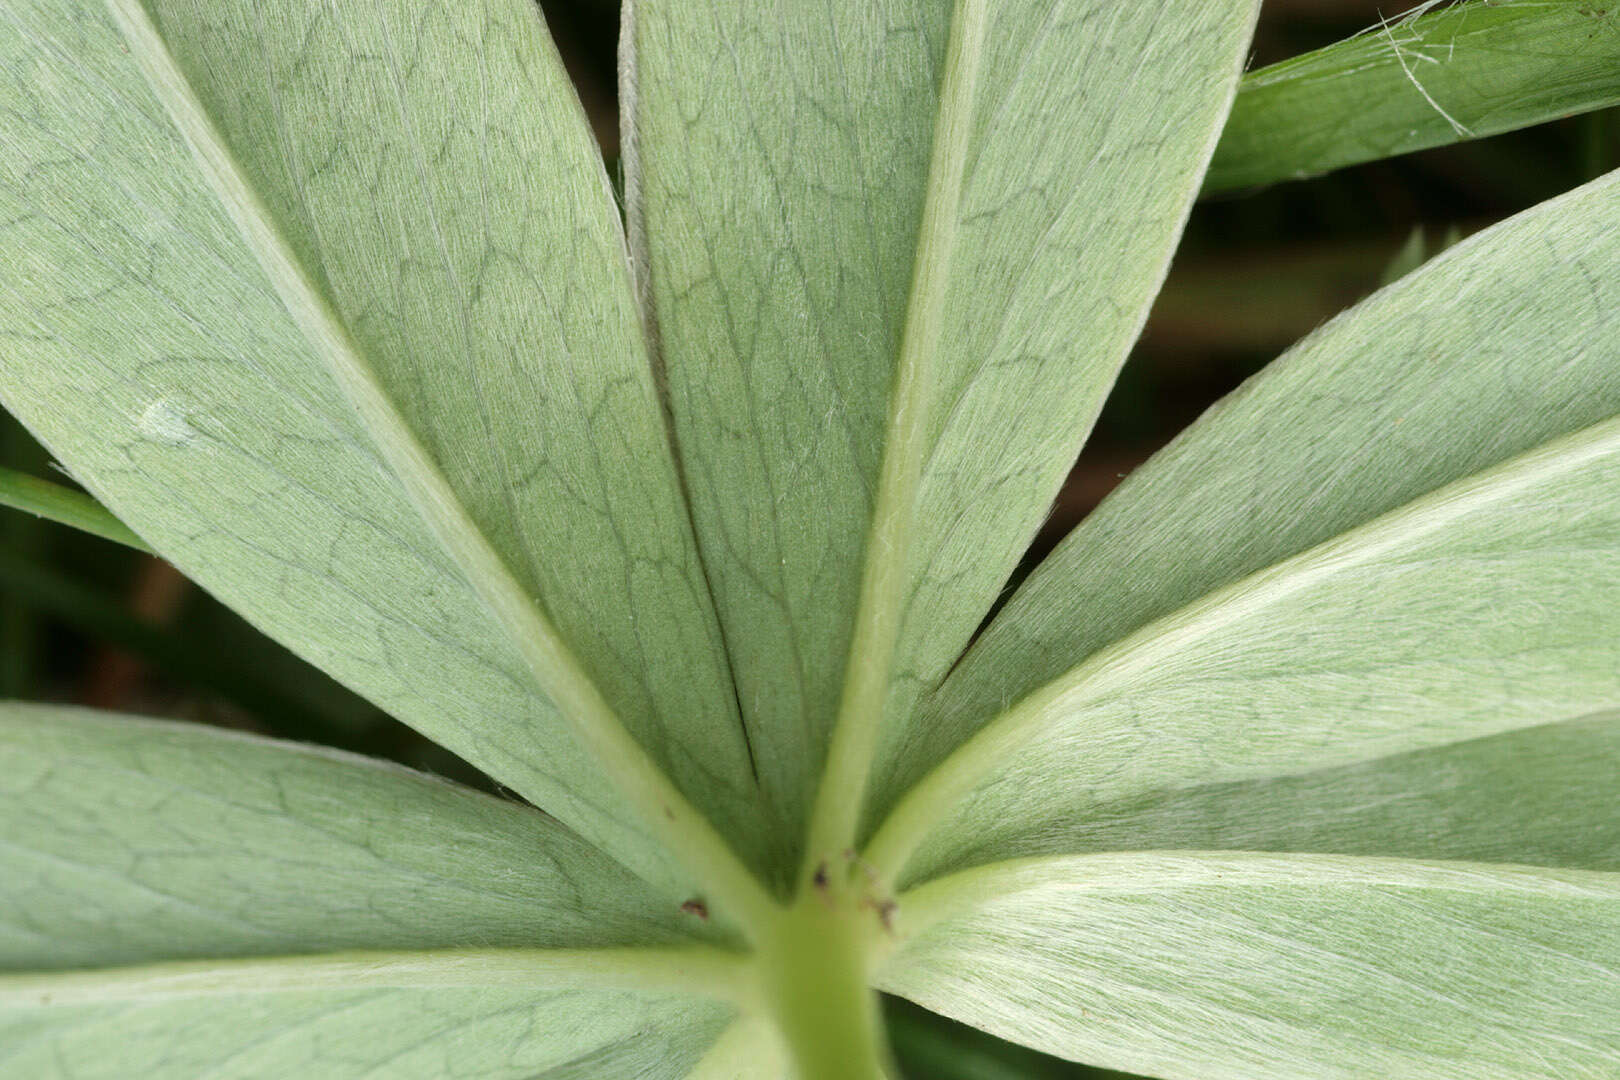 Image of Silver Lady's Mantle